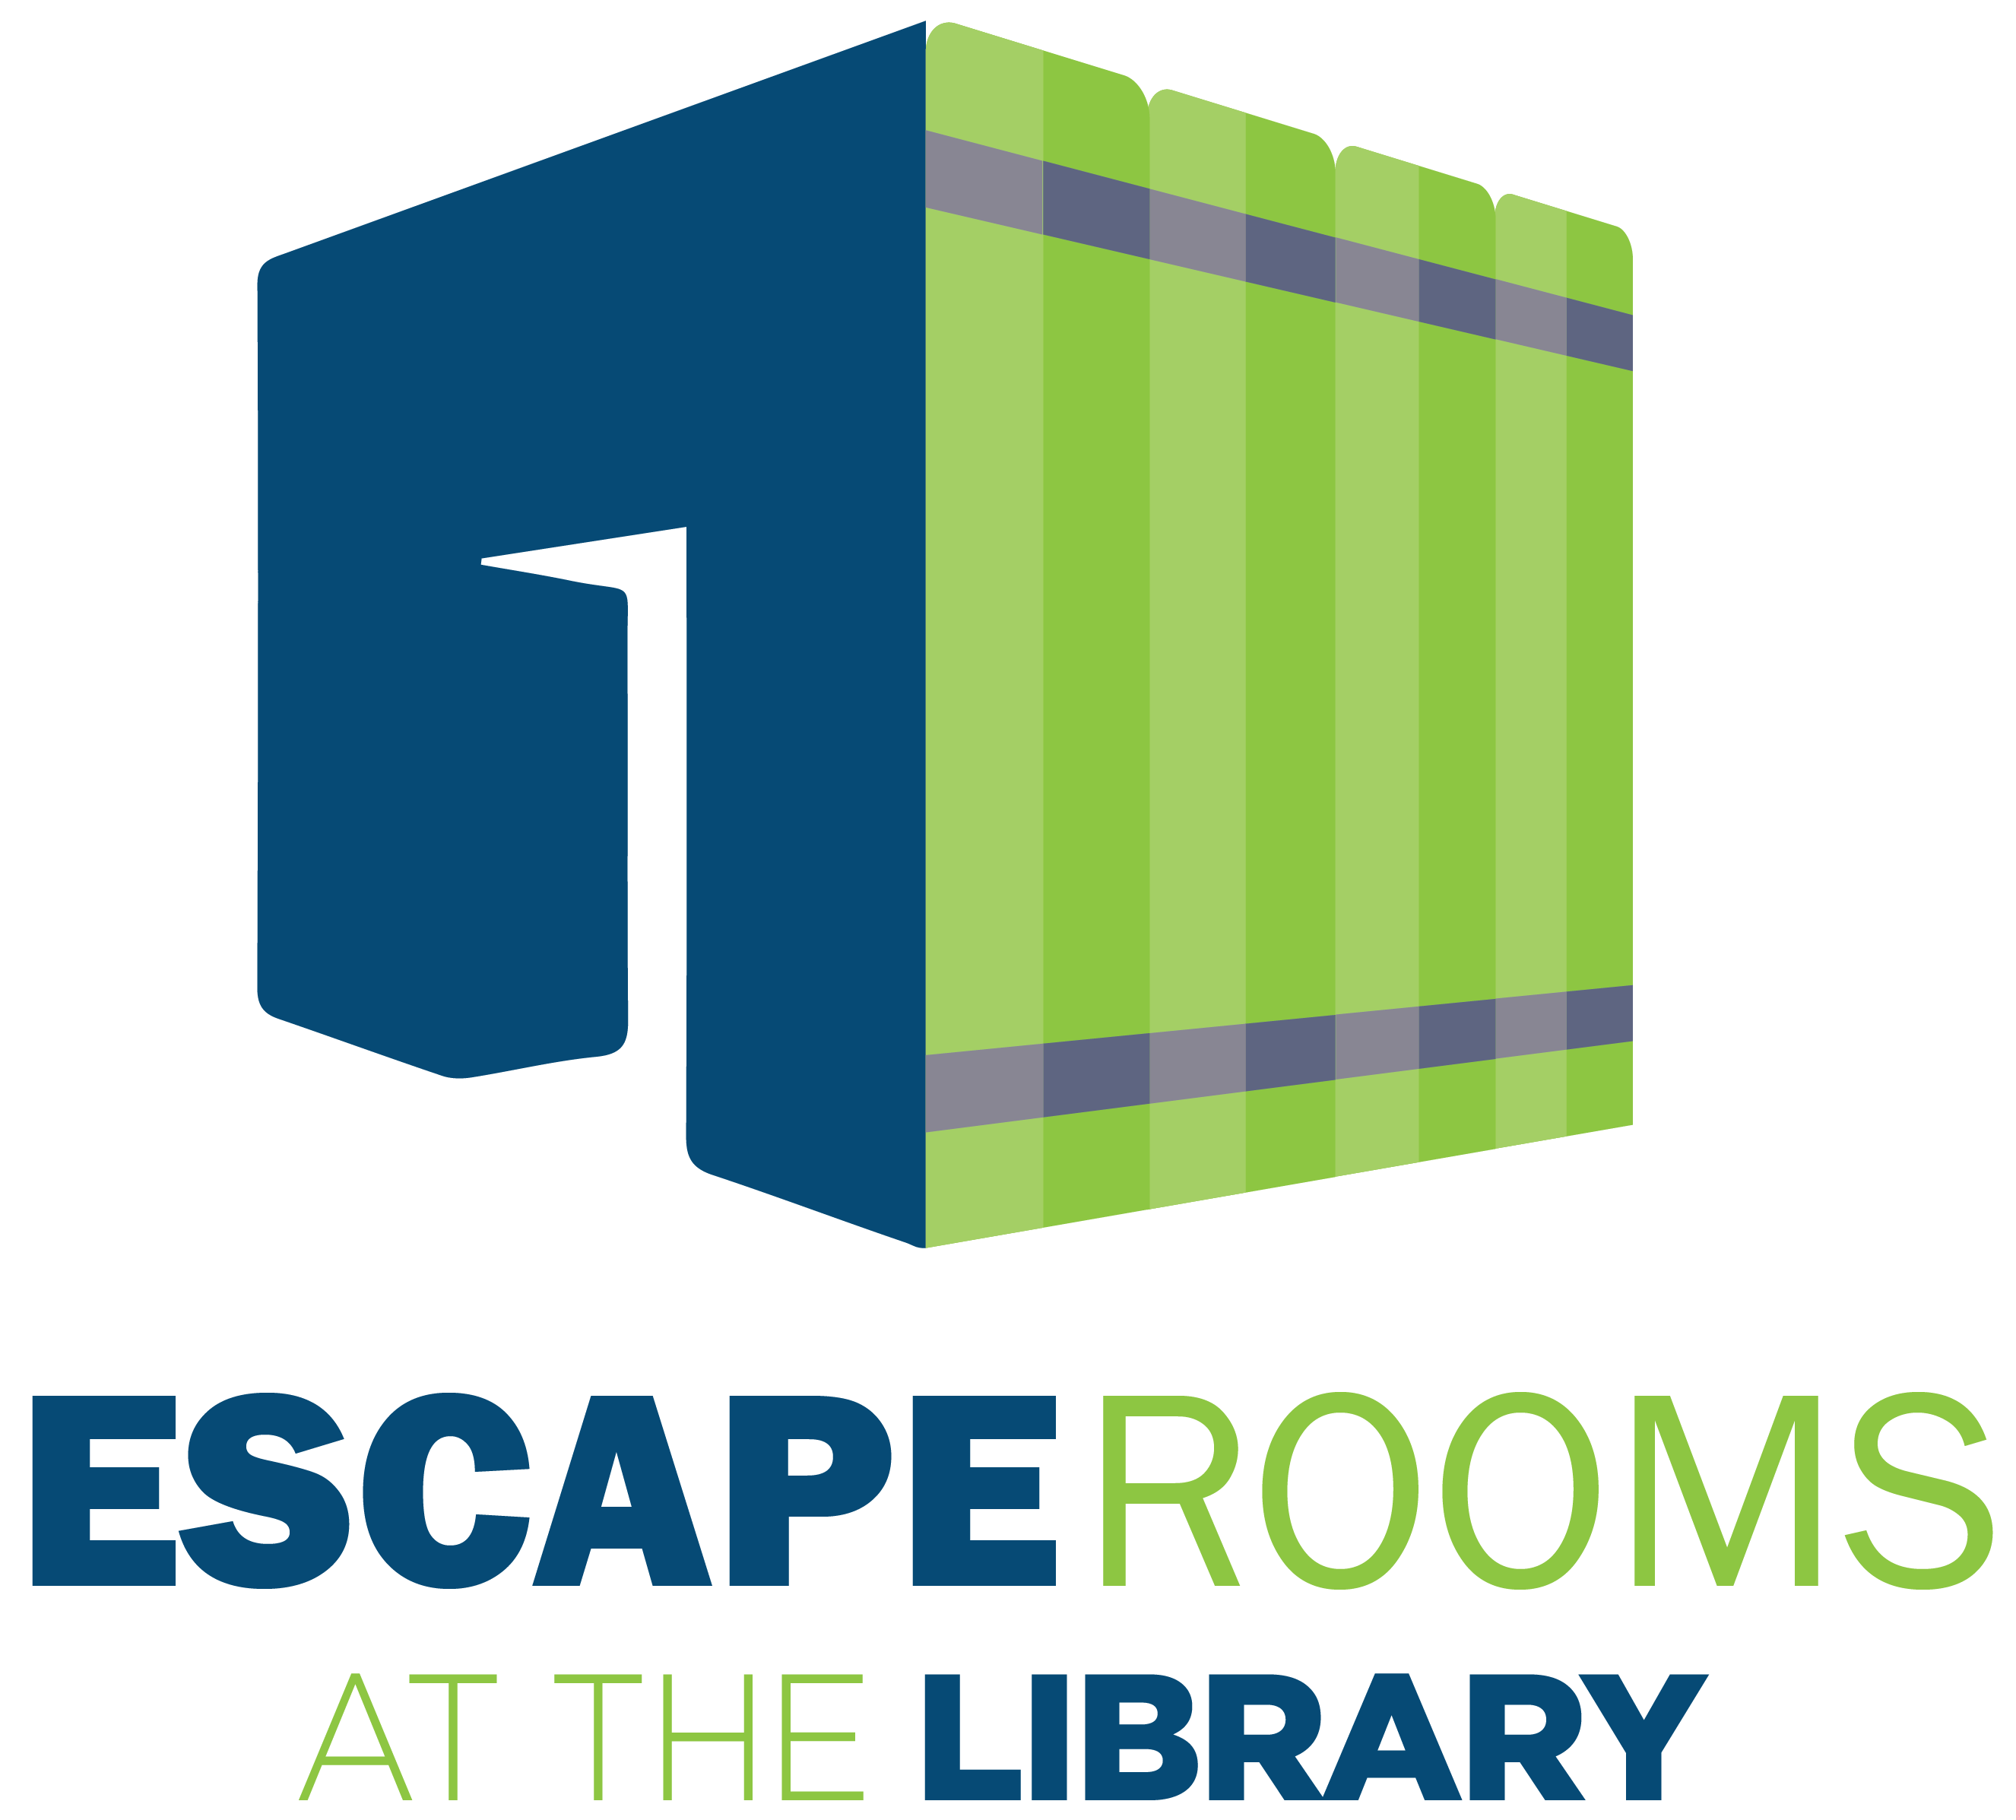 Escape Rooms at the Library logo.